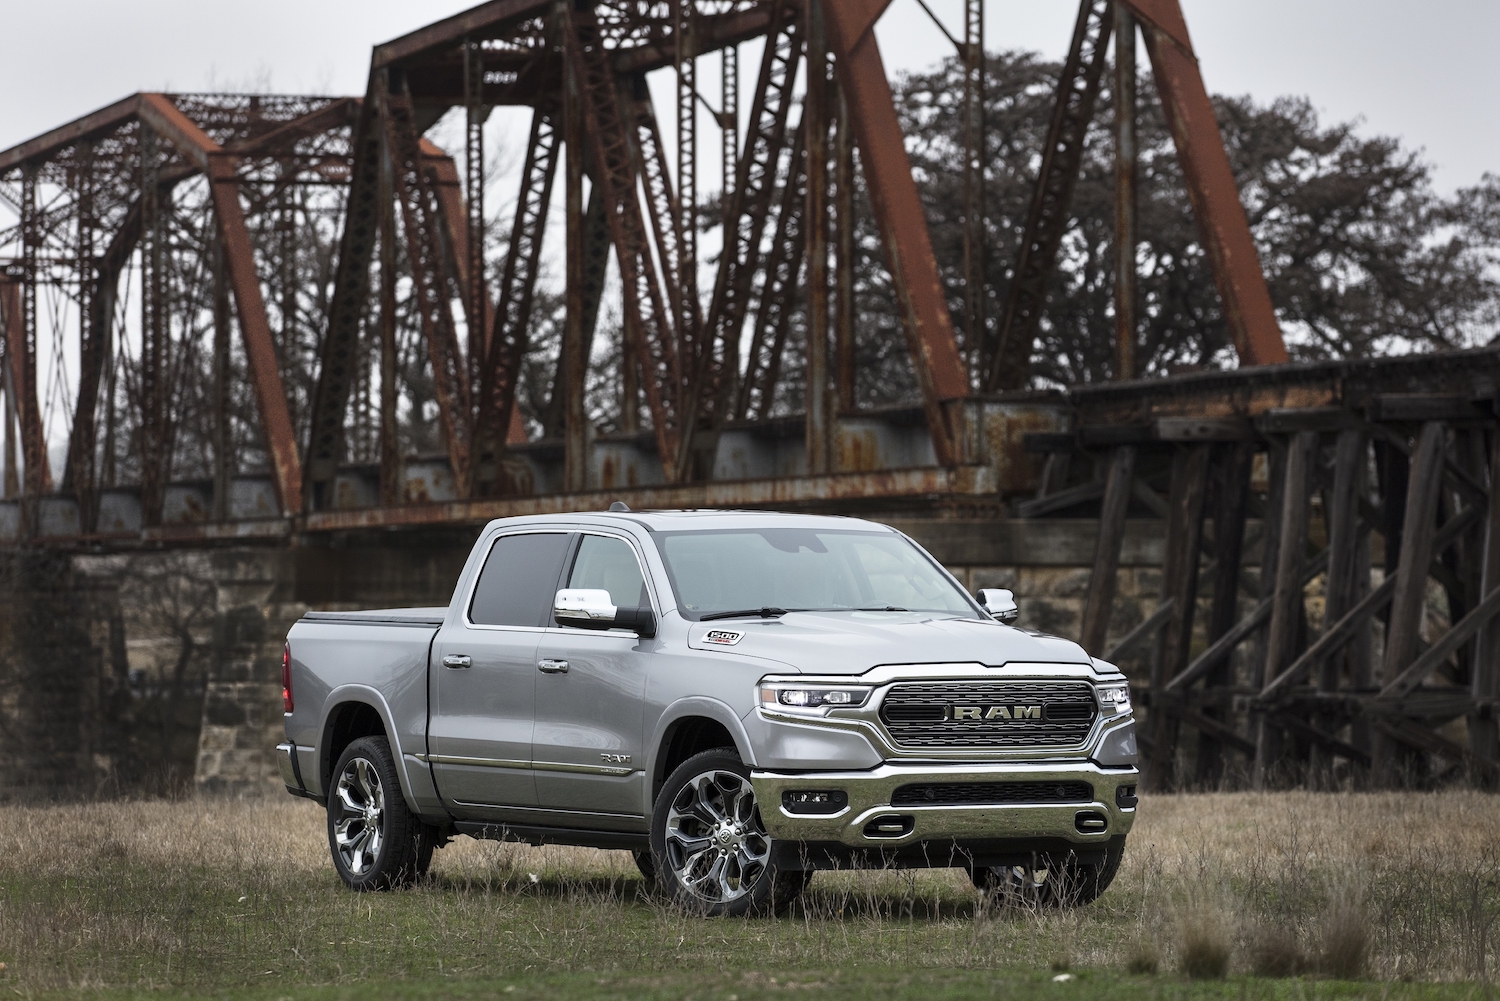 2021 Ram 1500 Limited EcoDiesel parked